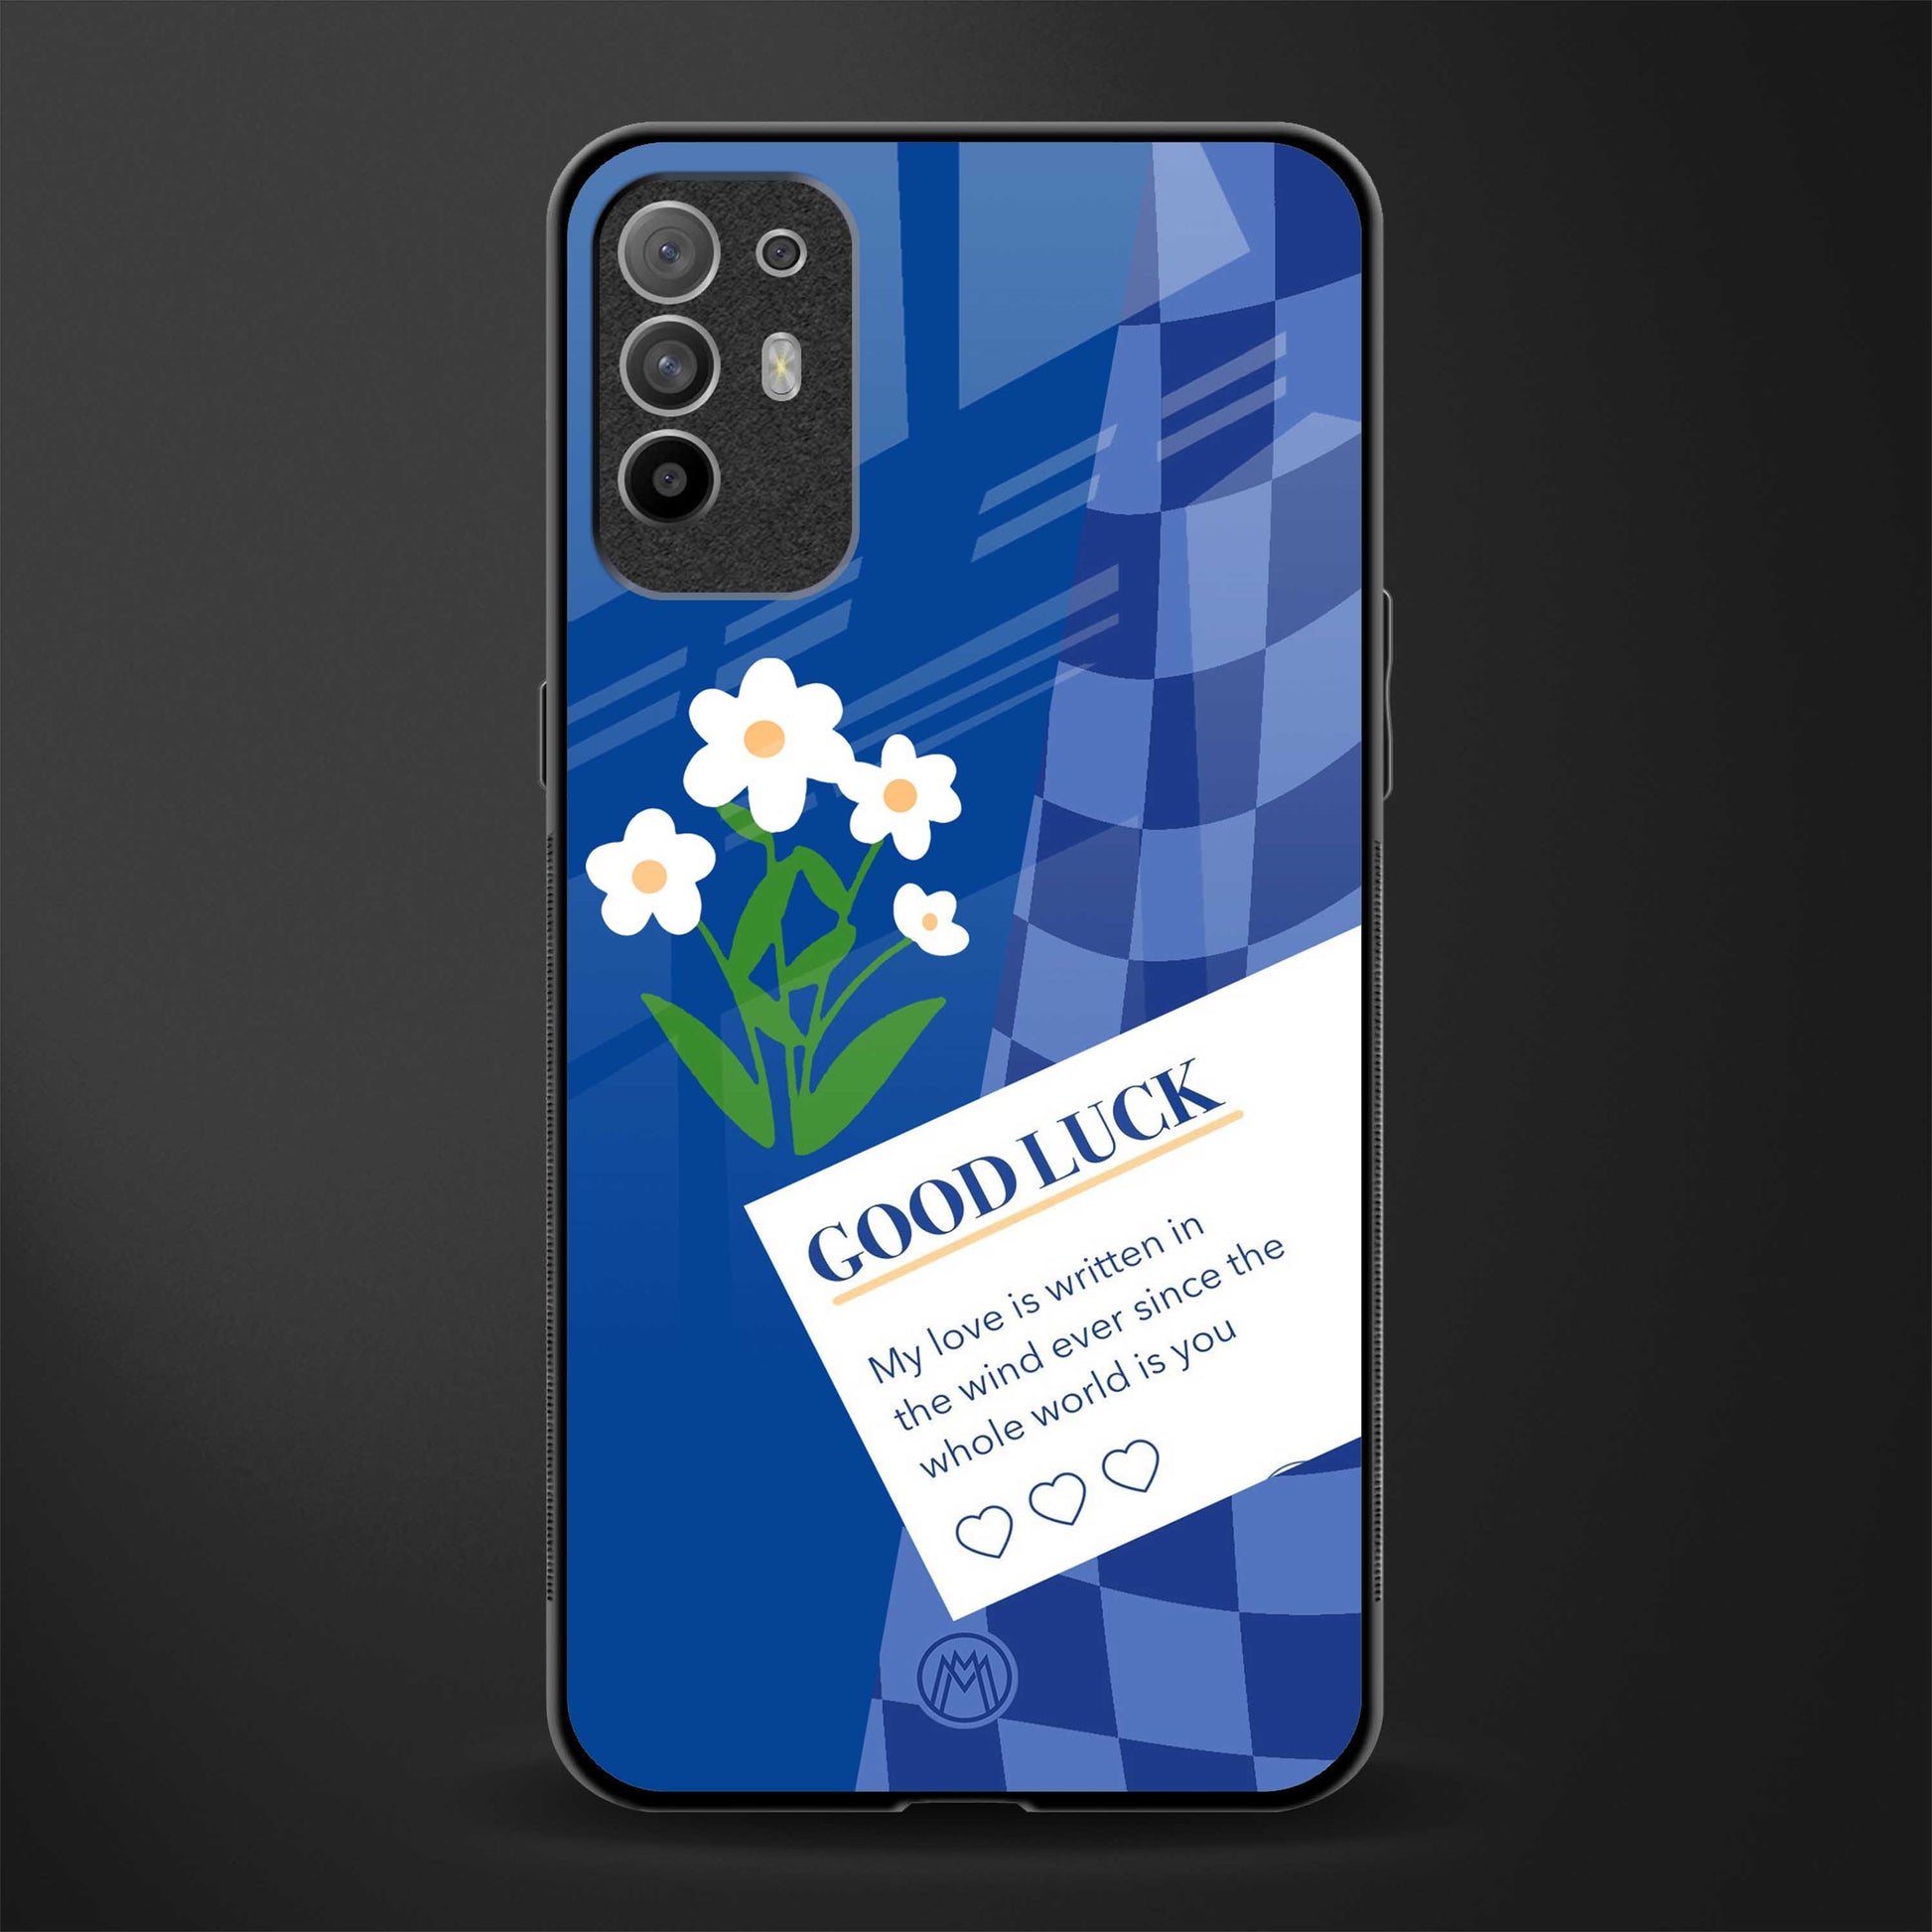 you're my world blue edition glass case for oppo f19 pro plus image